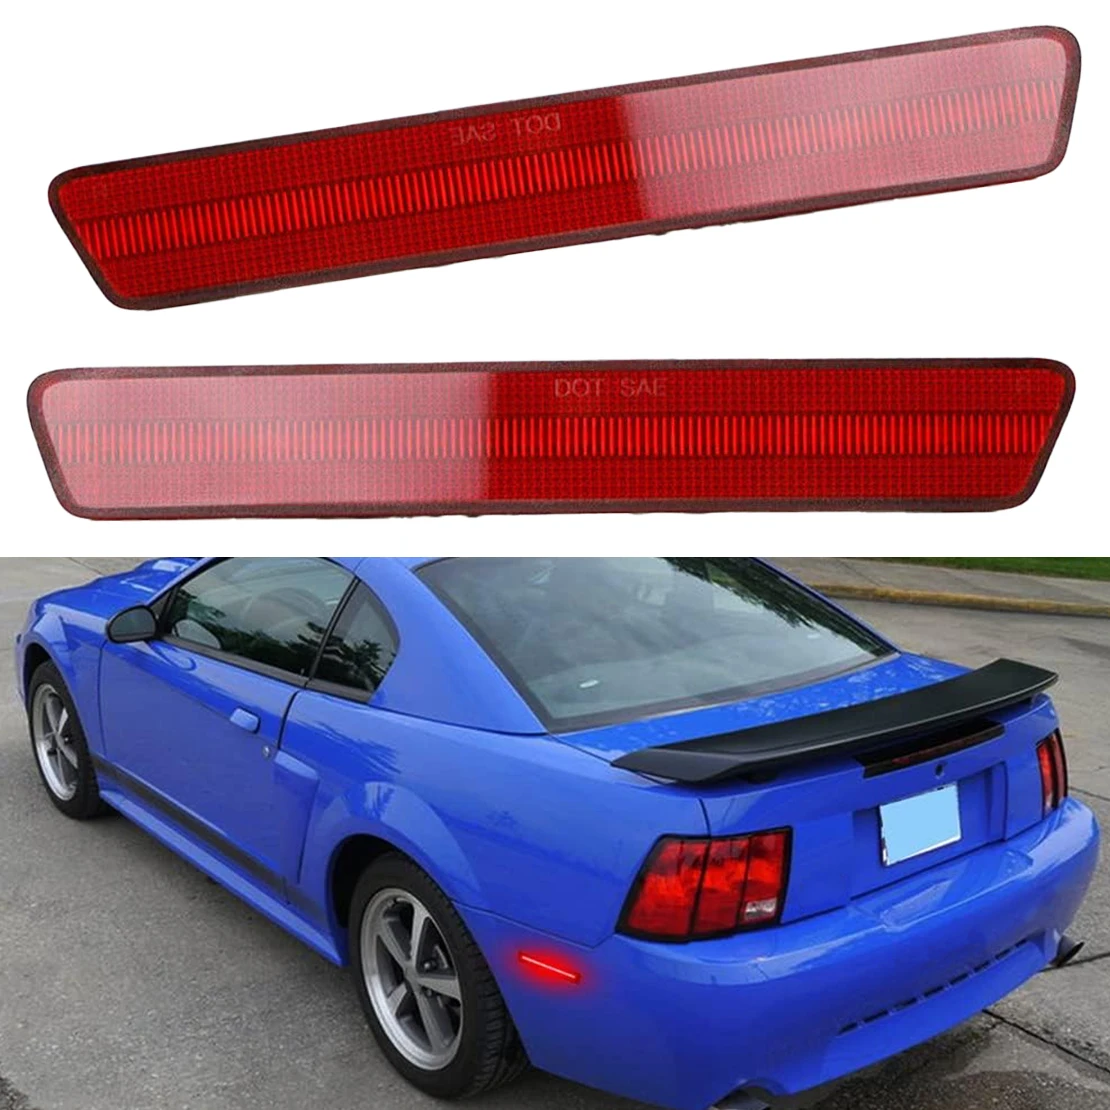 

XR3Z-15A448-AA 1 Pair Red Lens Rear Bumper LED Side Marker Light Fender Turn Signal Lamp Fit for Ford Mustang 1999 2000-2004